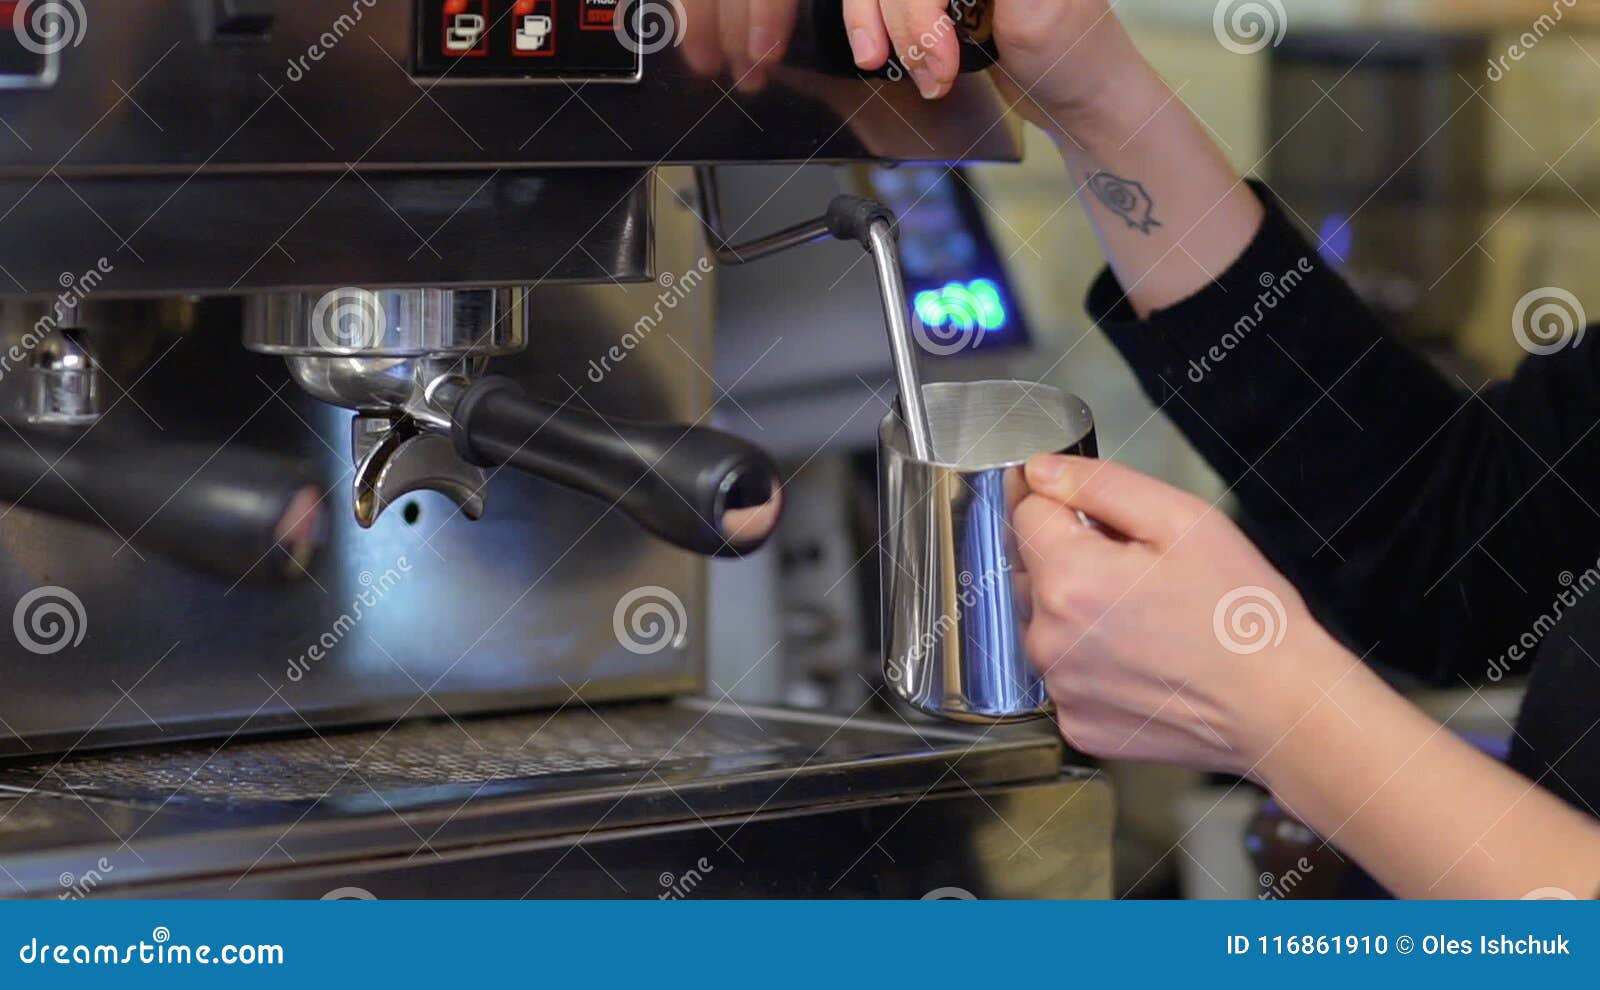 https://thumbs.dreamstime.com/z/barista-whisk-milk-coffee-machine-hot-steam-barista-whisk-milk-coffee-machine-hot-steam-barista-make-milk-116861910.jpg